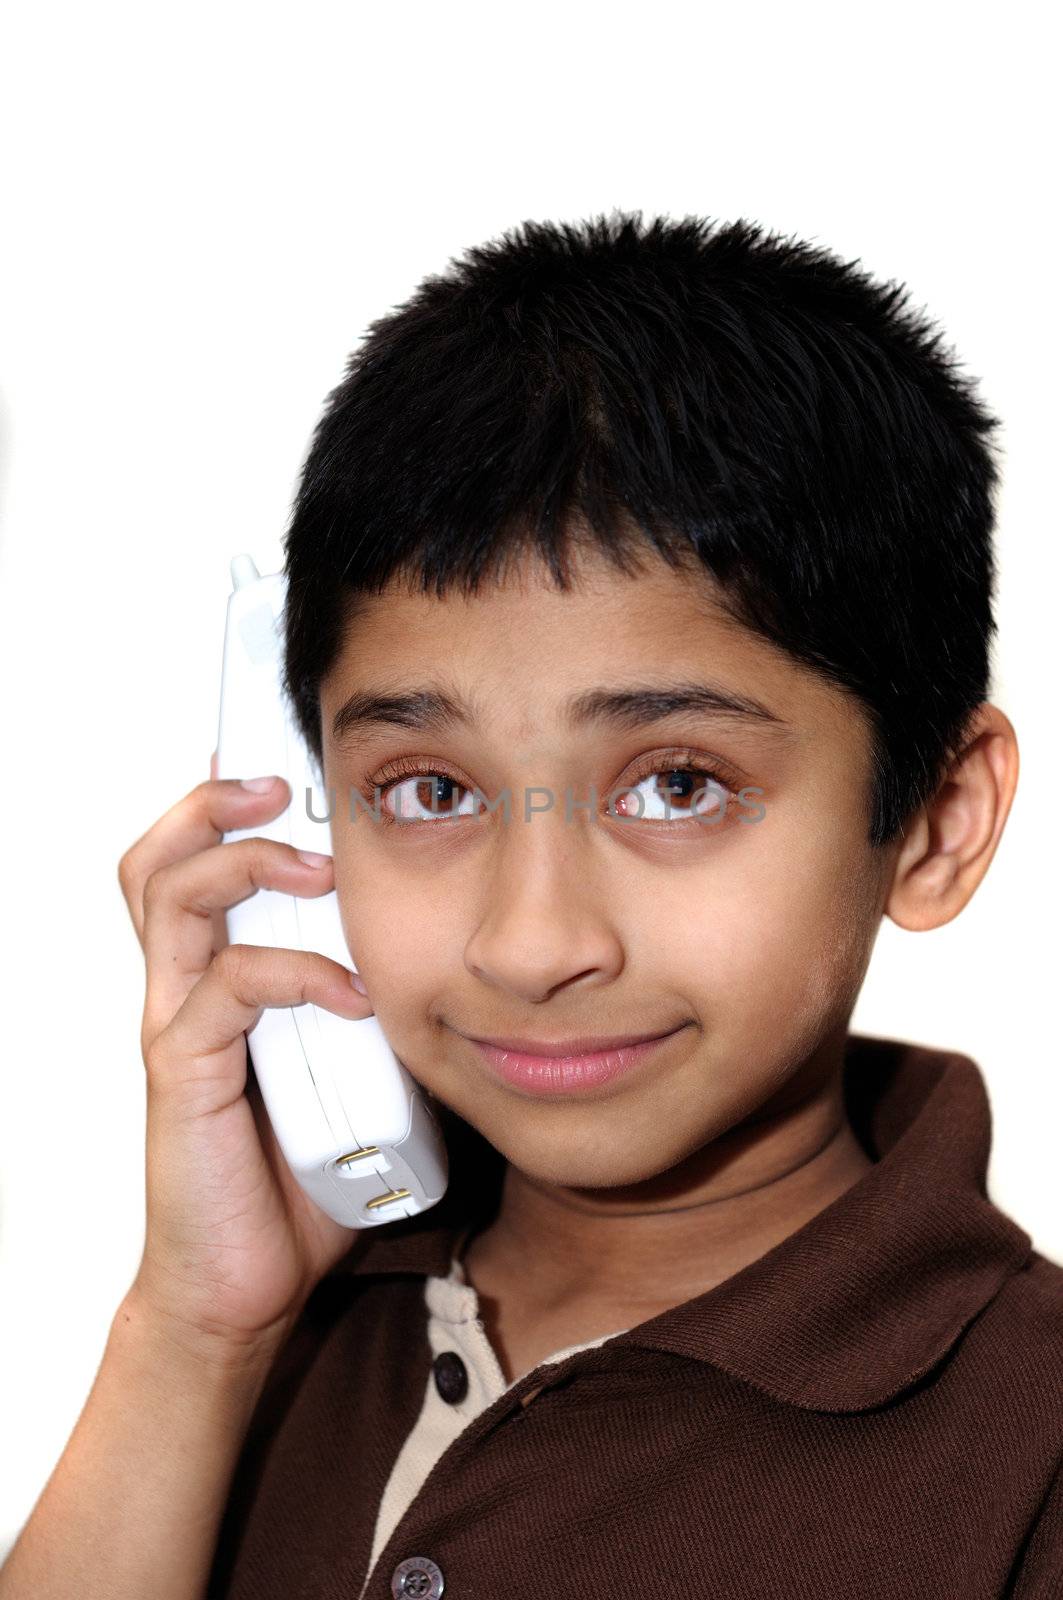 An handsome Indian kid having a conversation on the phone